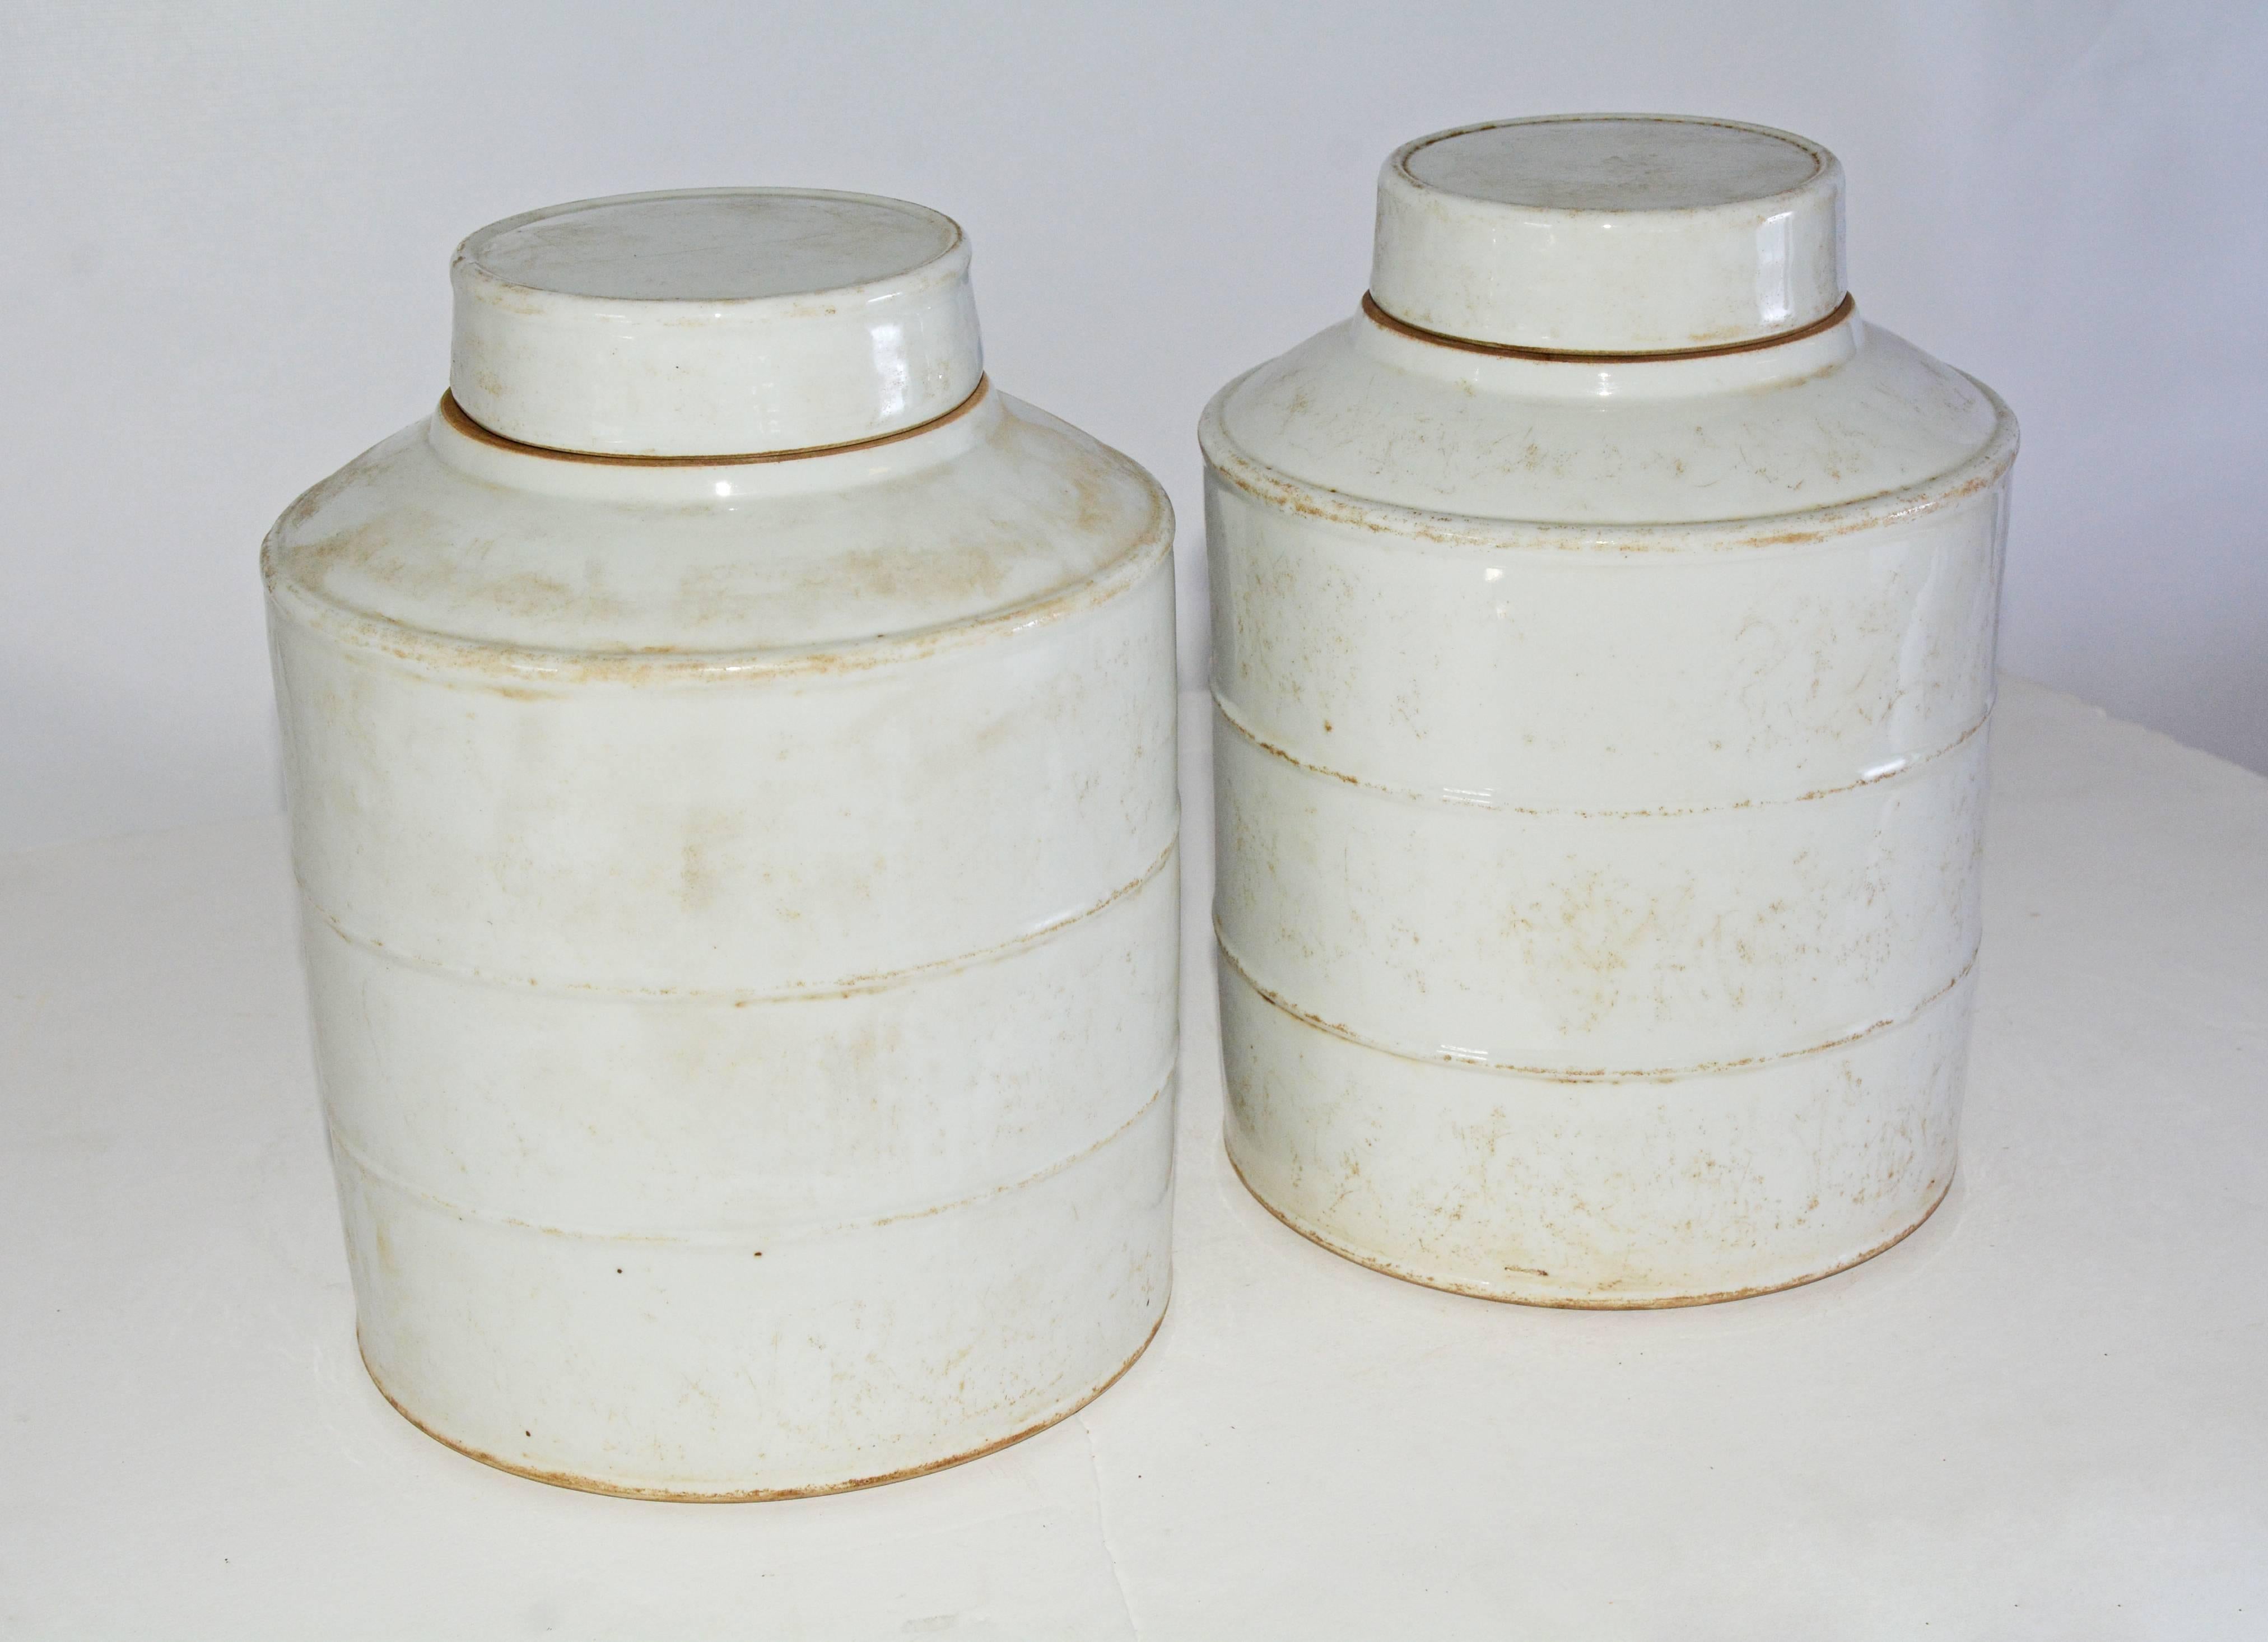 The pair of white vintage Chinese ginger jars and lids are made of pottery. The sides are divided into three sections by raised bands.